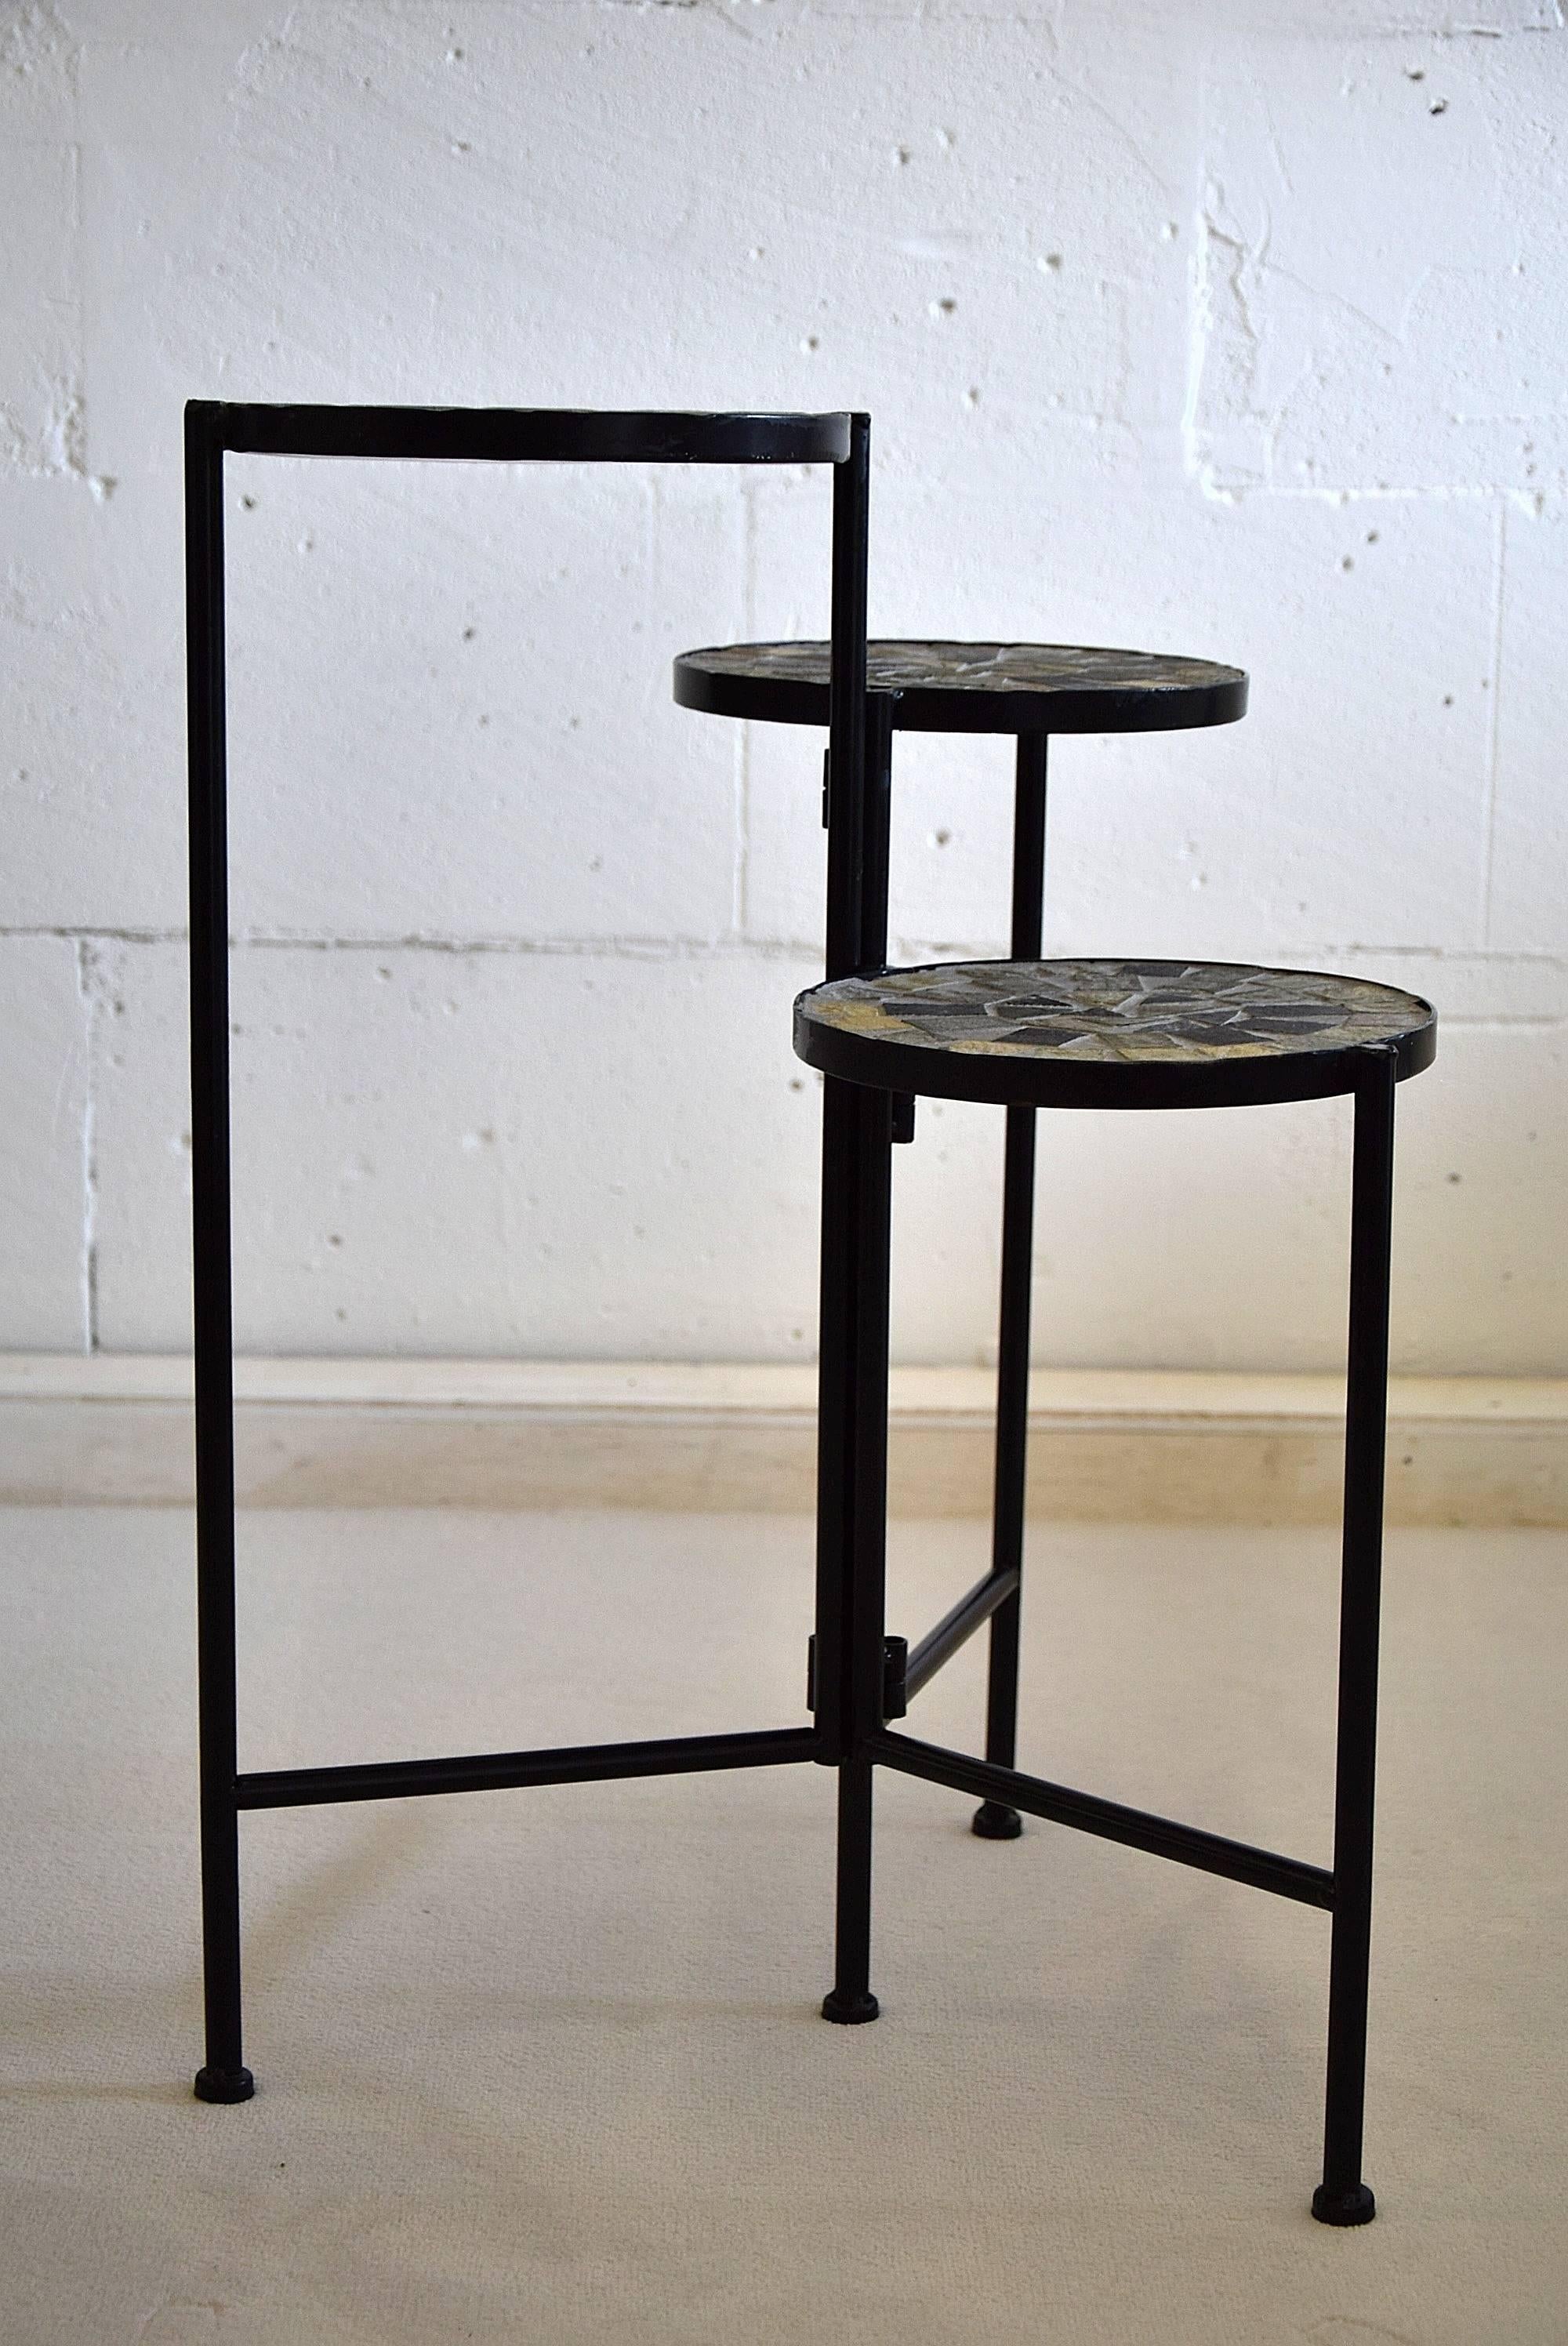 Dutch Mid-Century Modern plant stand
Very stylish and typical 1960's metal and mosaic plant stand in great condition.

Each of the three tiers has a diameter of 22 cm heights od 60, 51 and 41 cm.

Plant stand will be shipped abroad in a custom-made